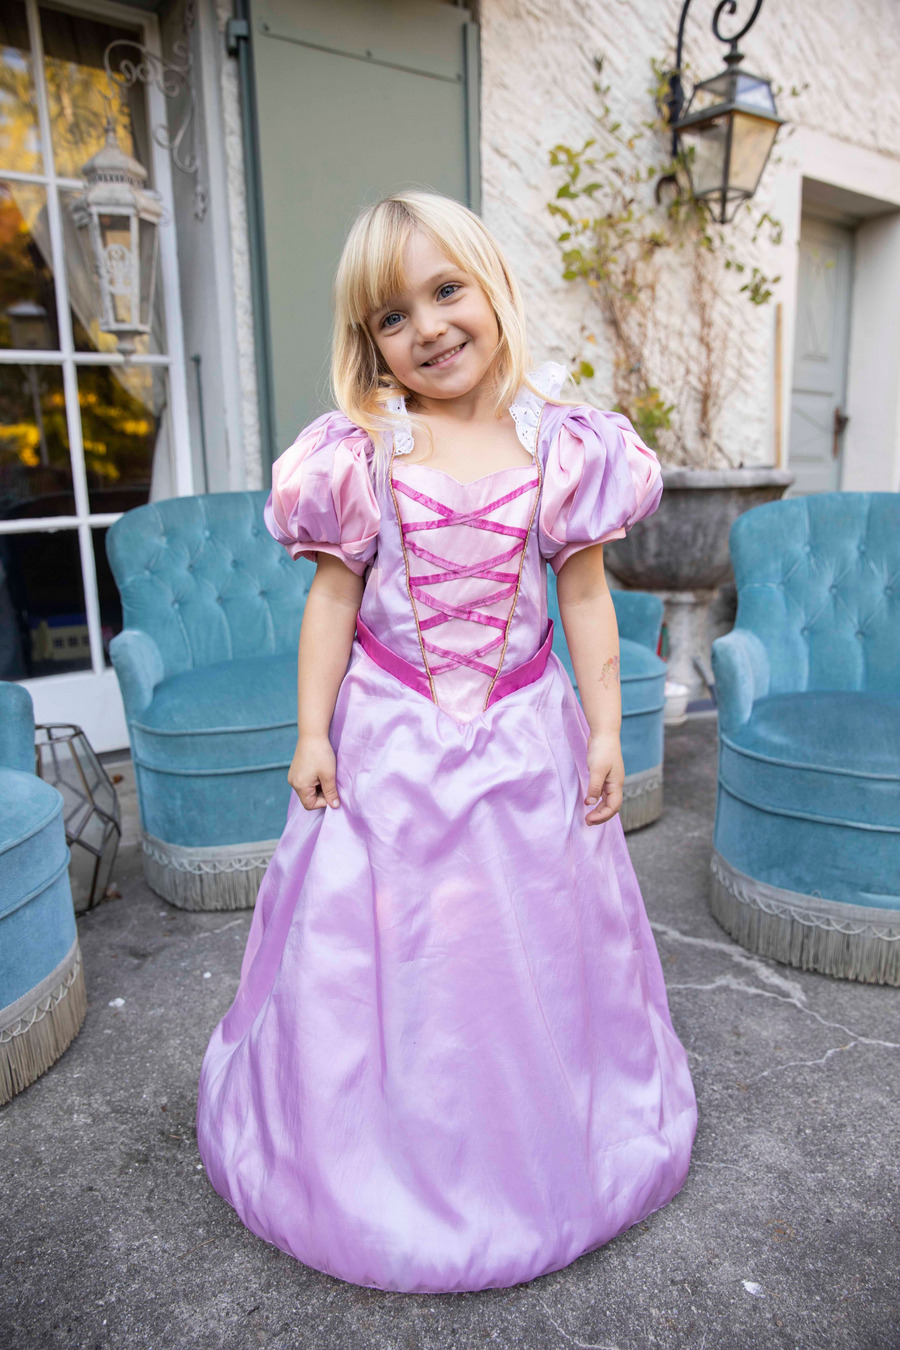 brooke thelen recommends dancing bear pink dress pic